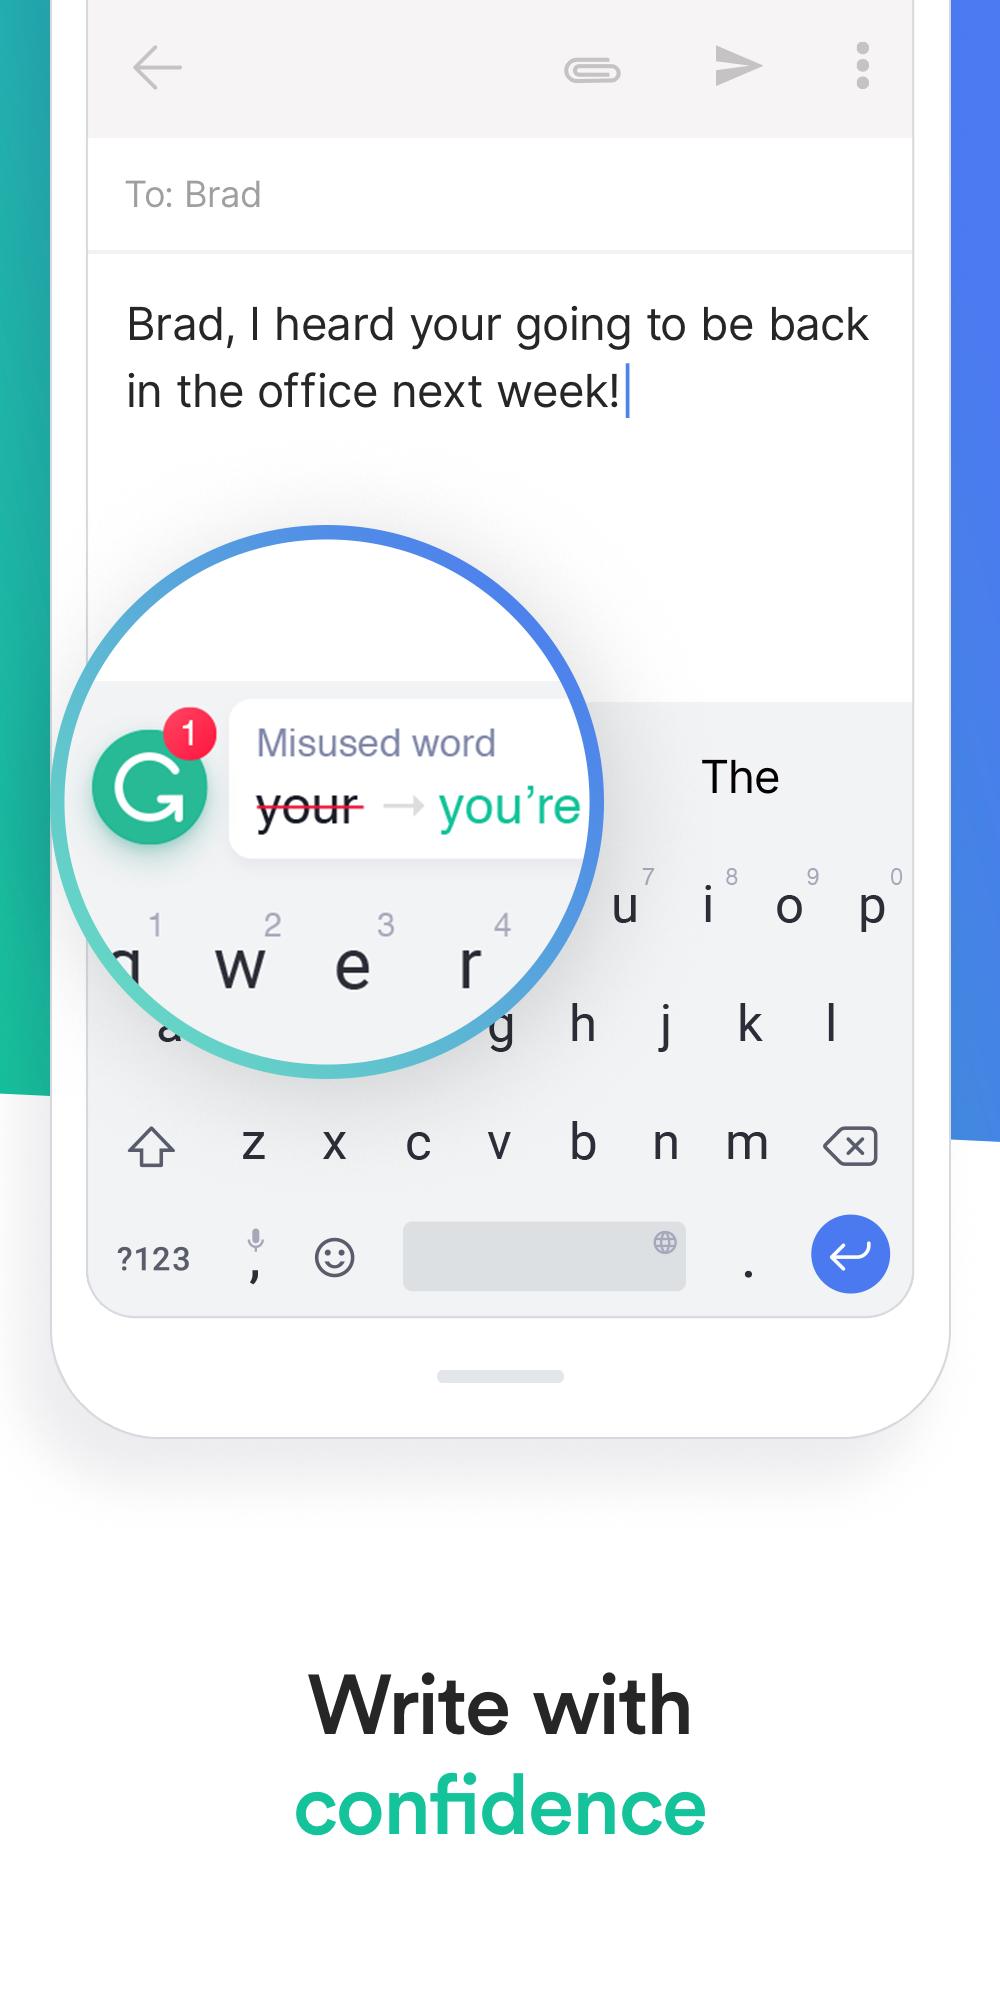 grammarly free download for mobile